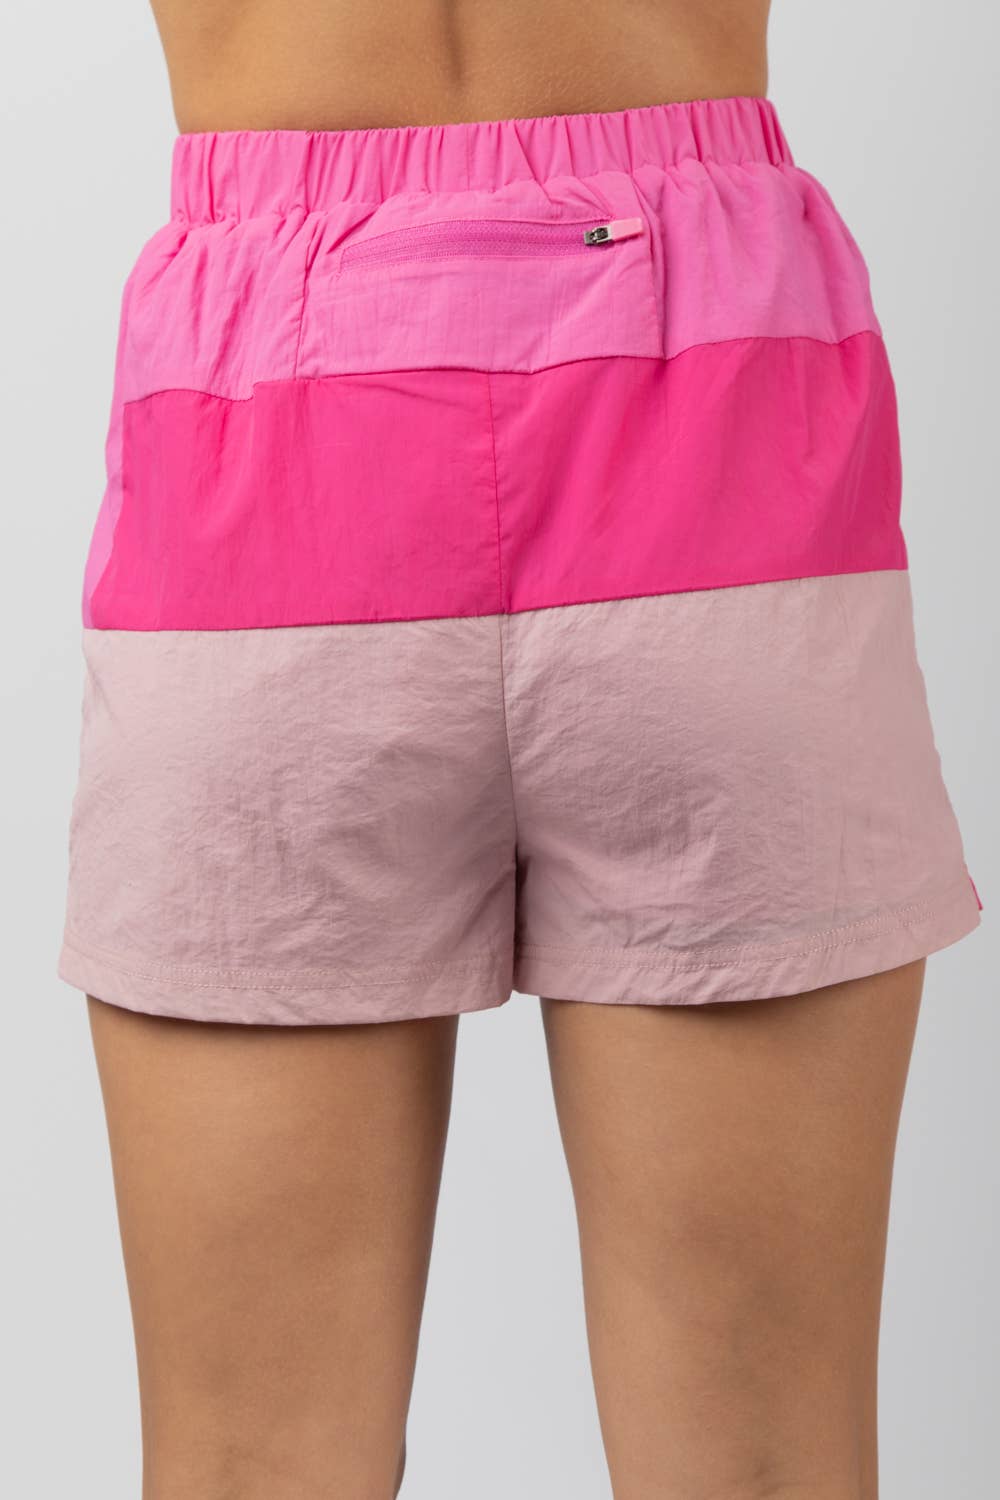 These Are The Days Color Block Activewear Skort